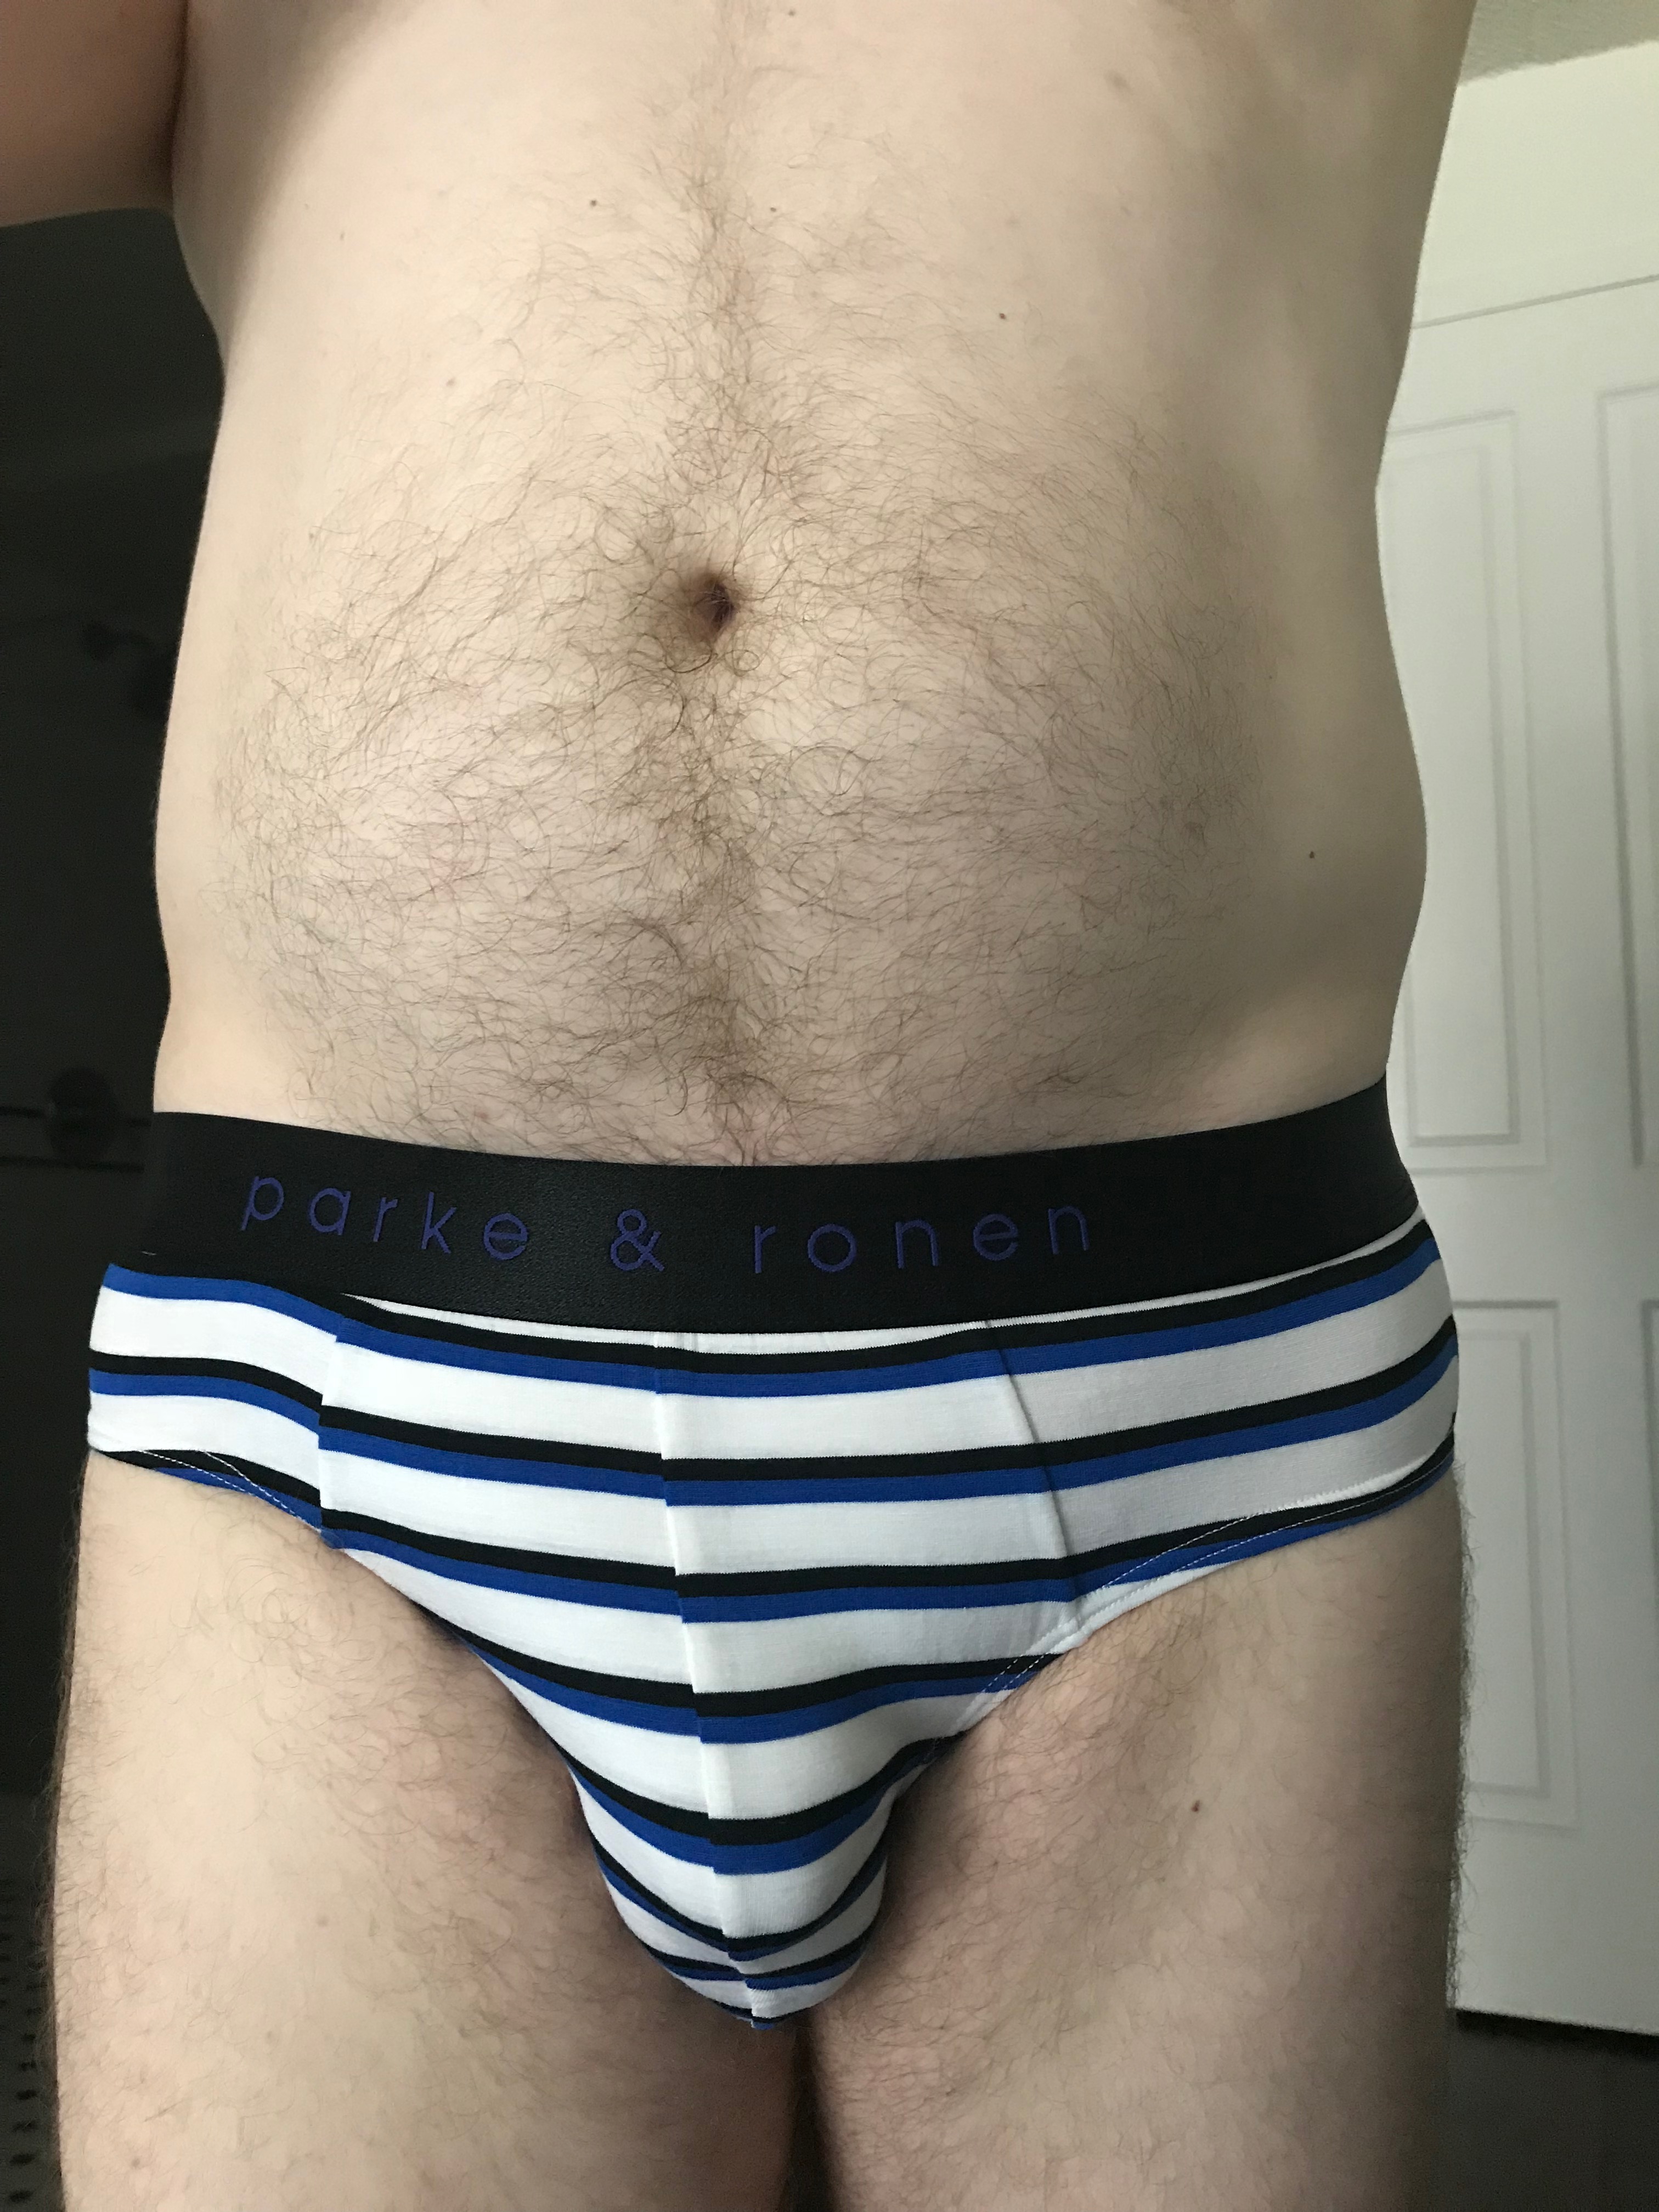 Parke & Ronen stripes to start the week off right…